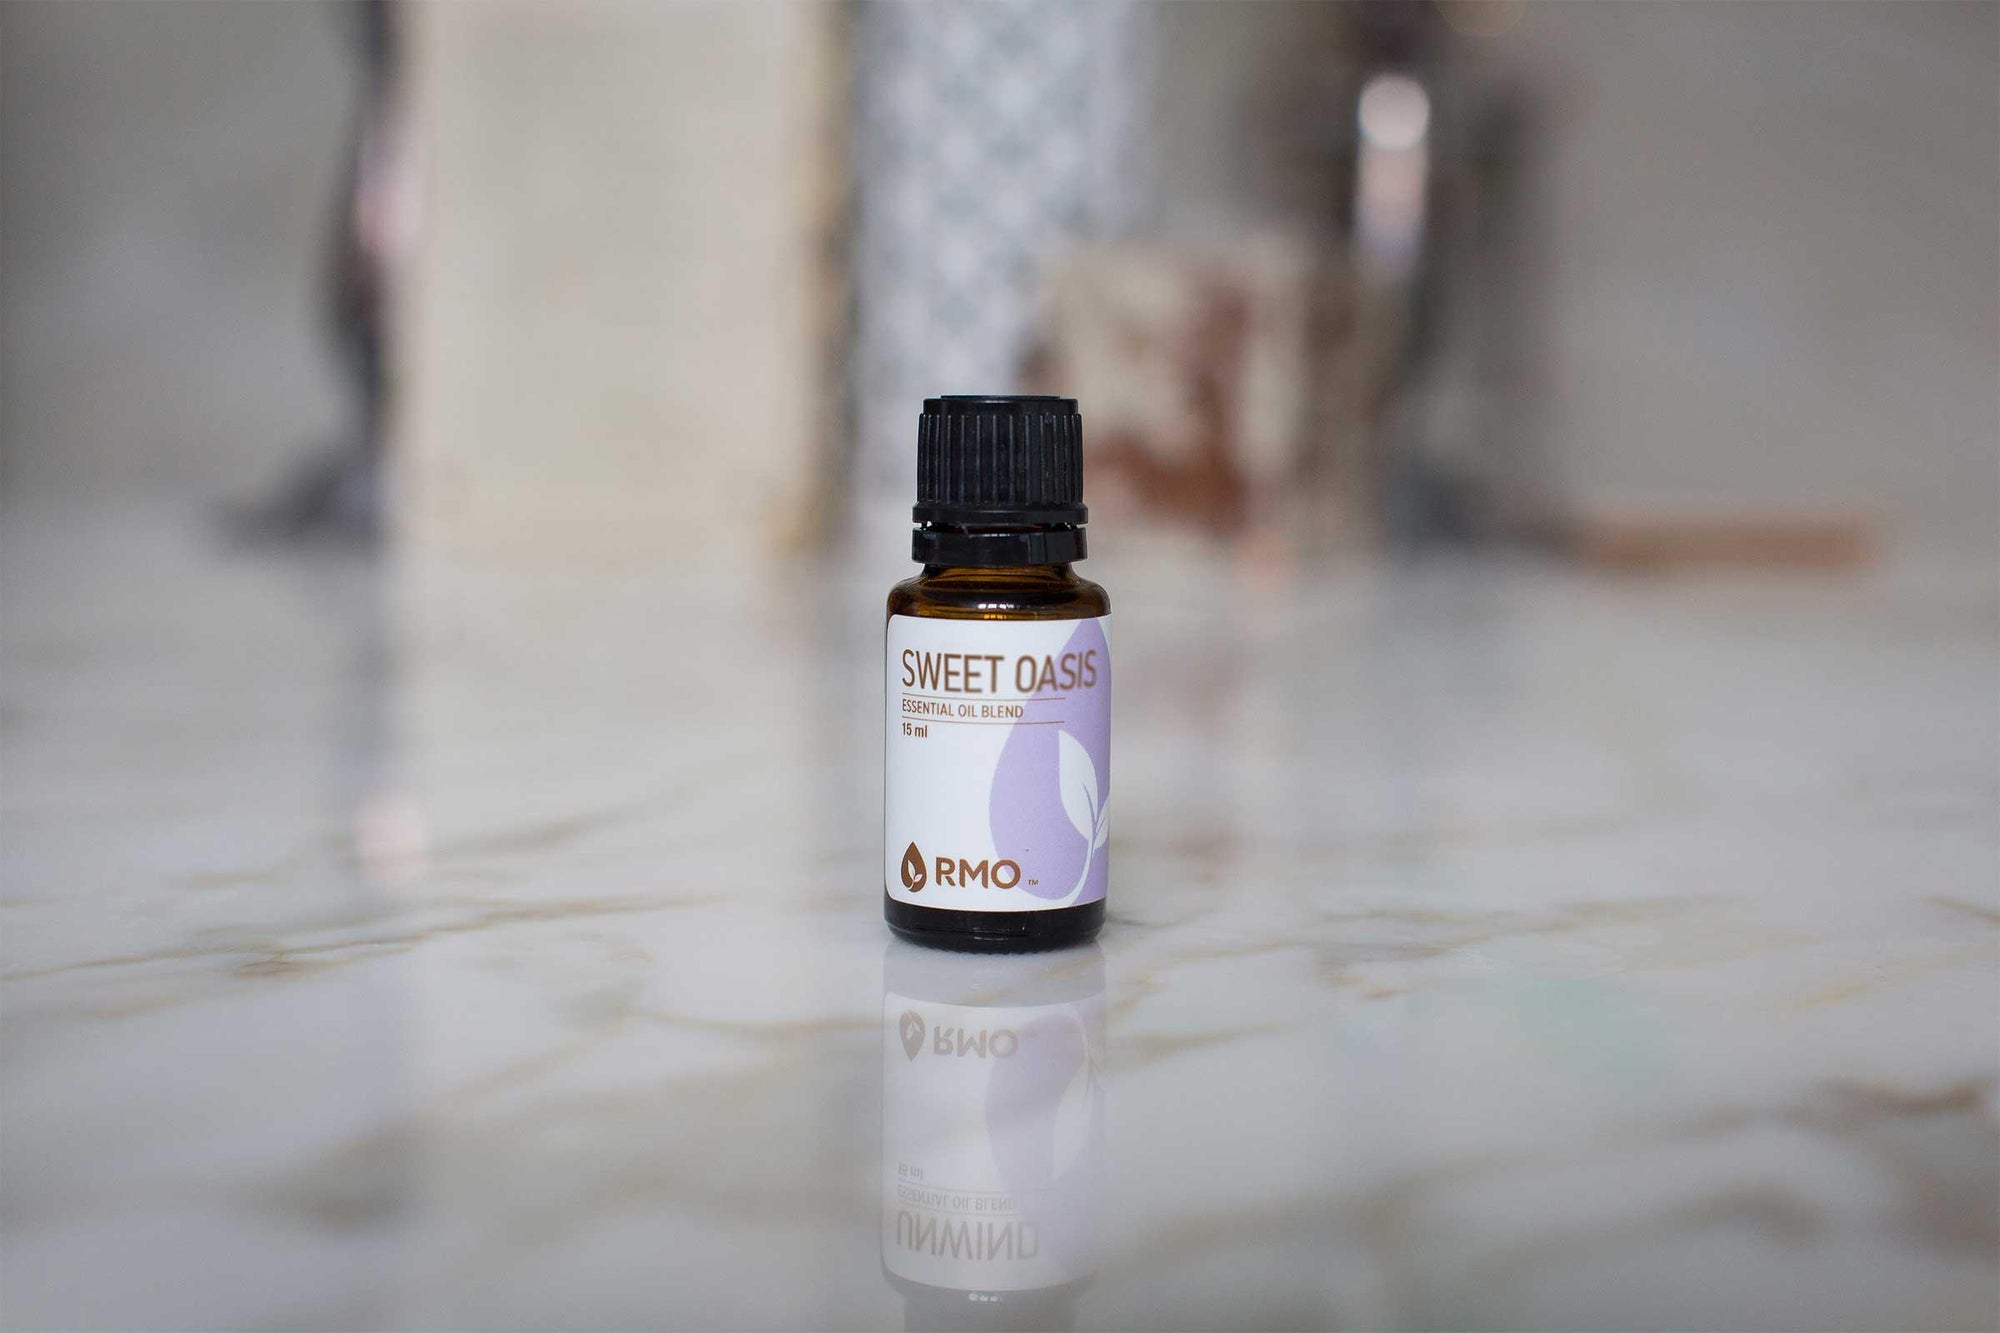 Sweet Oasis: The Perfect Oil For True Relaxation